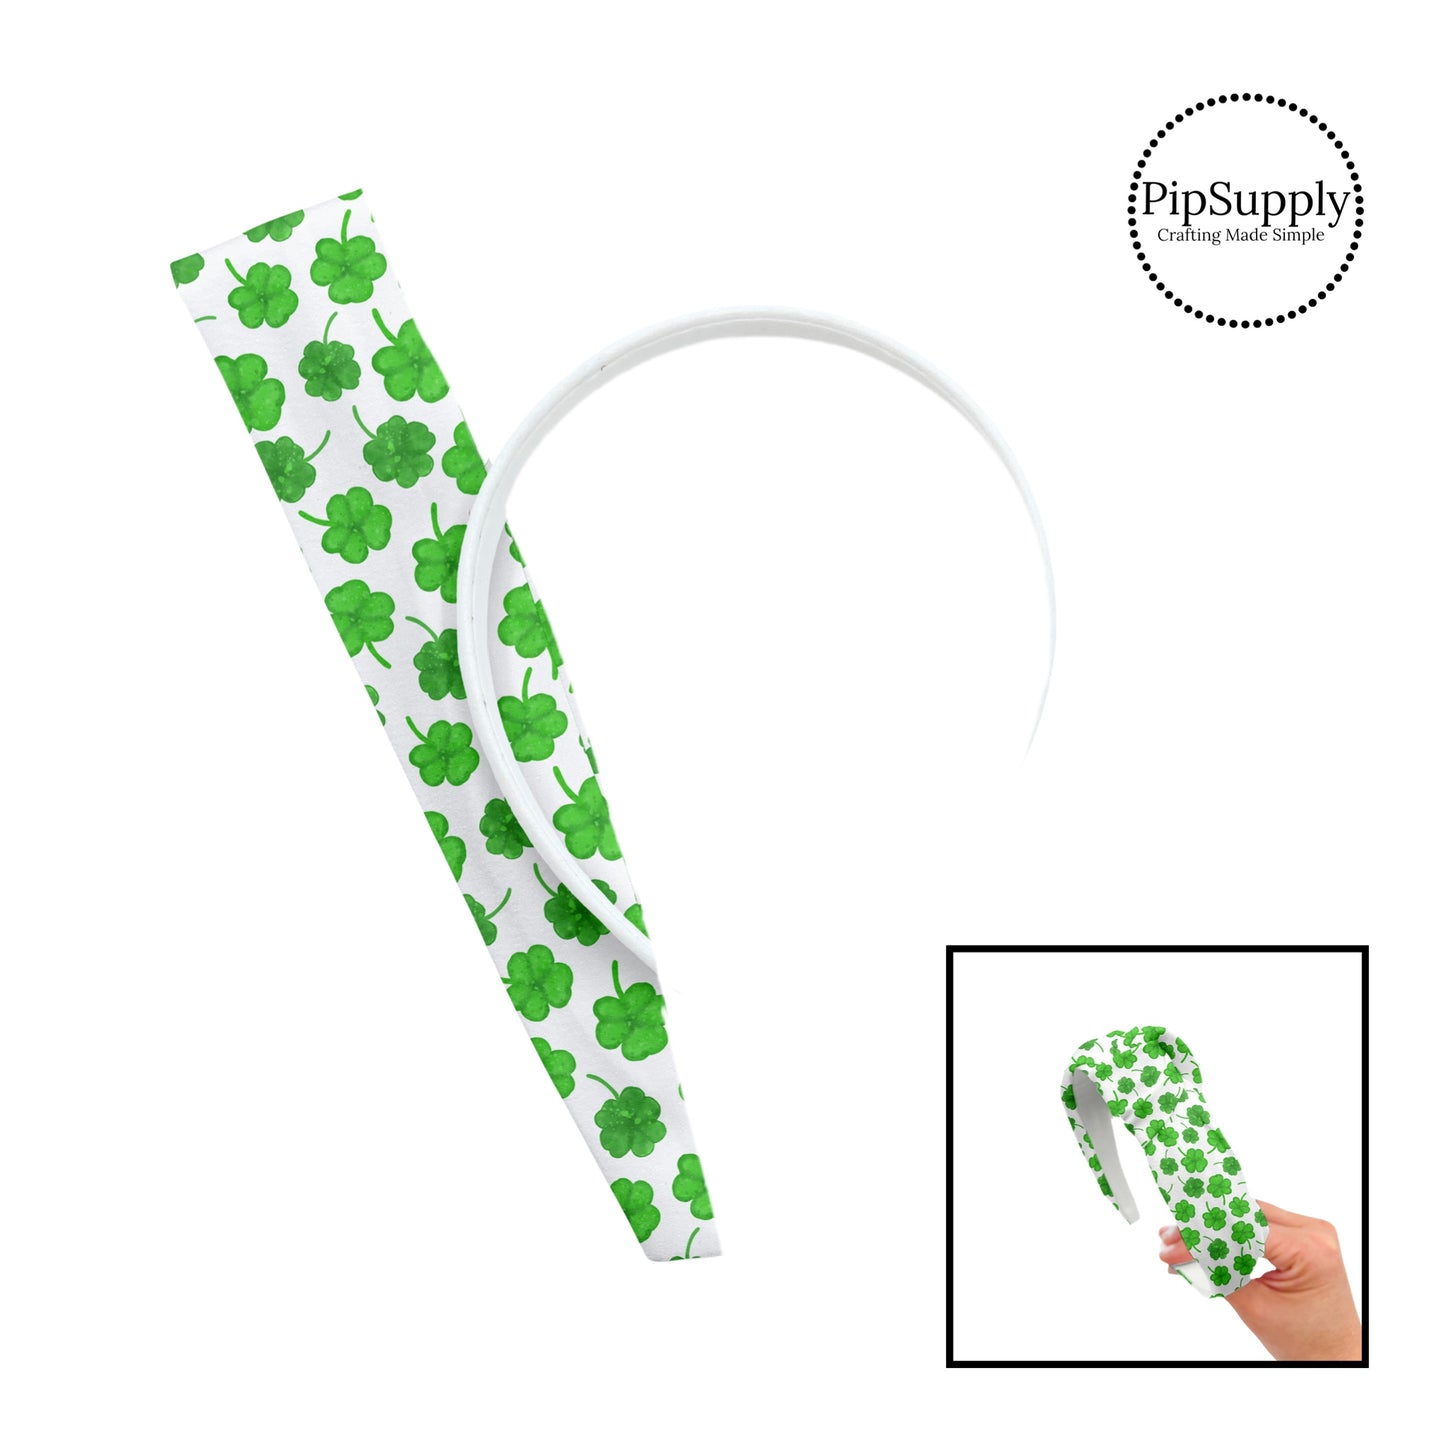 These patterned headband kits are easy to assemble and come with everything you need to make your own knotted headband. These St. Patrick's Day kits include a custom printed and sewn fabric strip and a coordinating velvet headband. This cute pattern features green shamrocks on white.